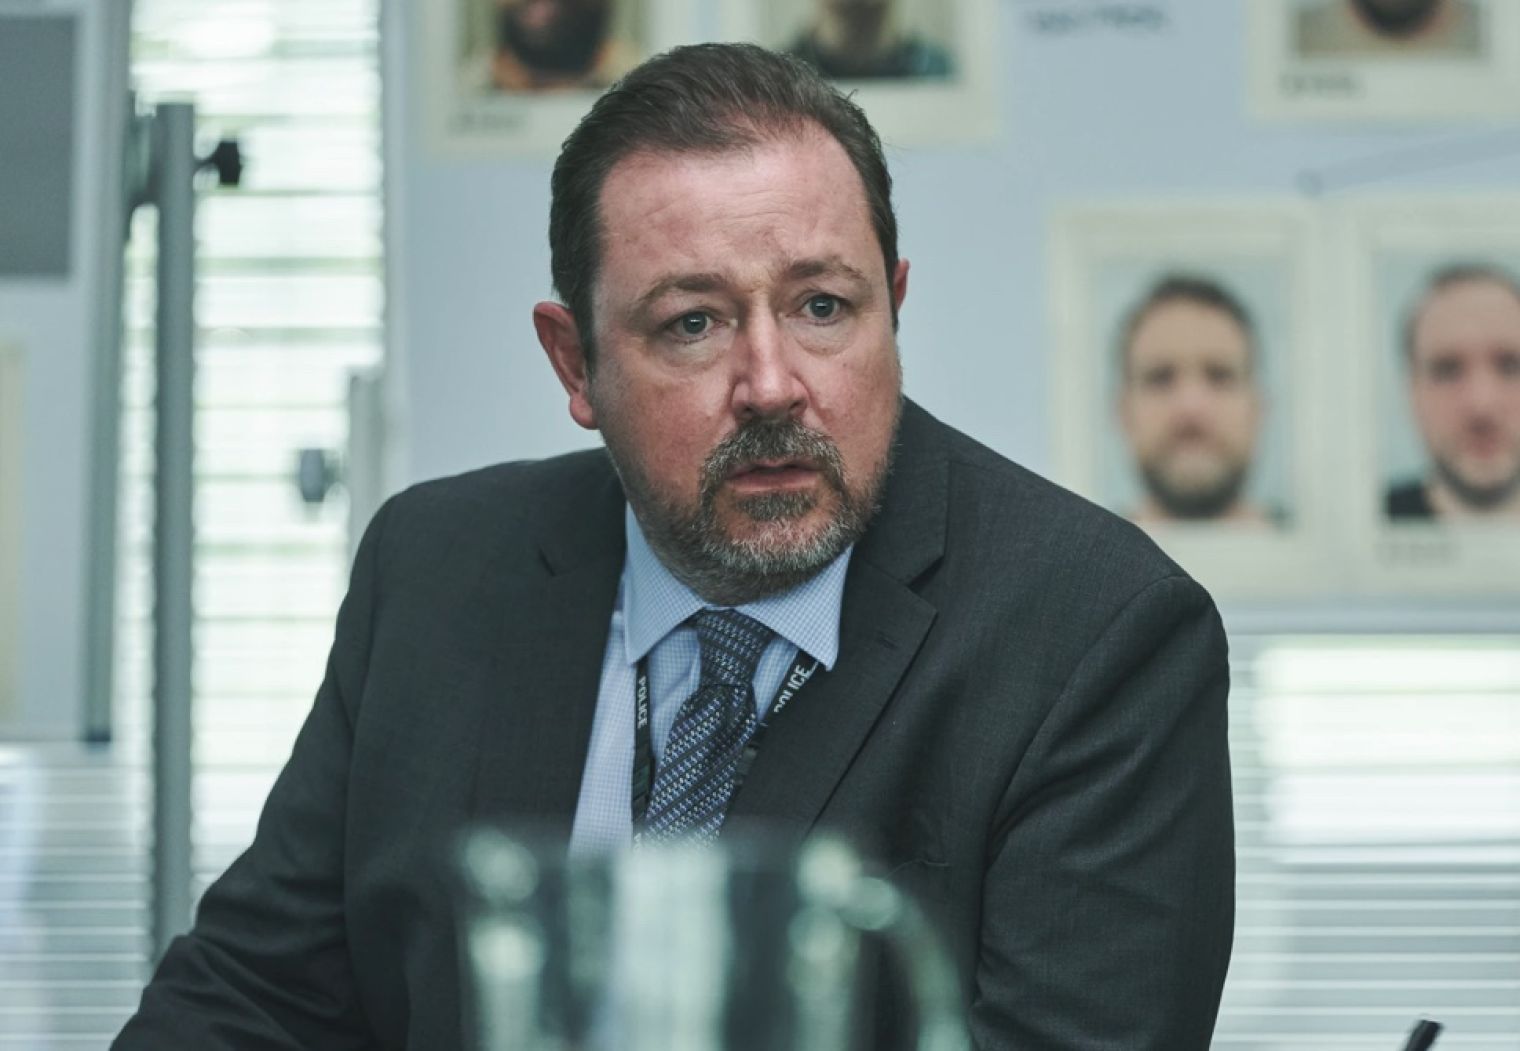 Daniel Ryan will be returning as police boss DI Tony Manning in a 5th series of ITV’s hit crime drama ’The Bay’